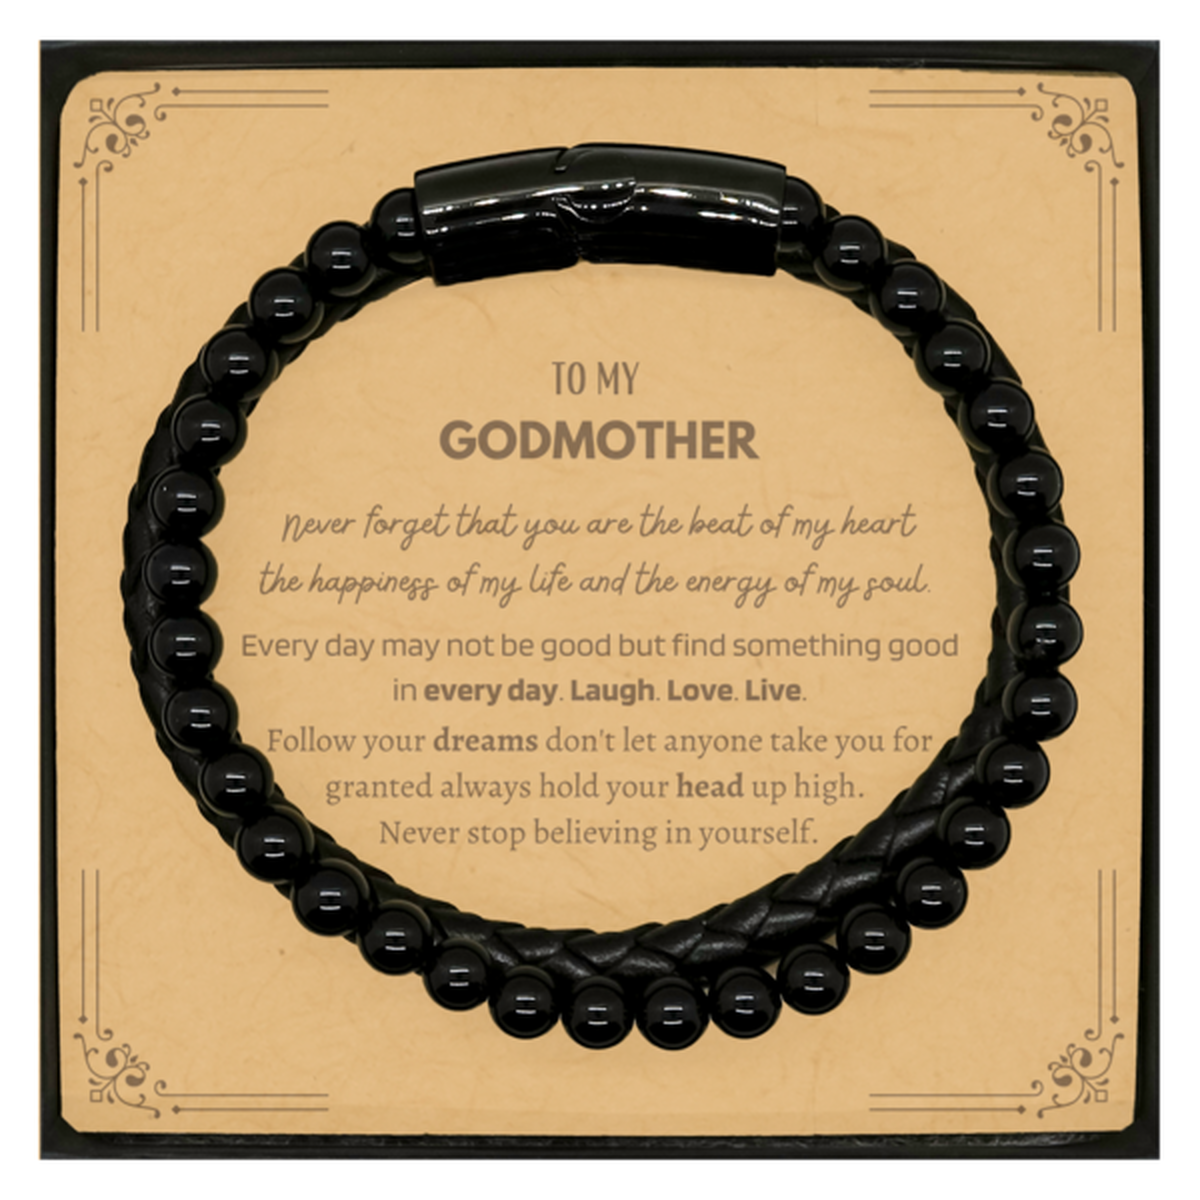 To My Godmother Message Card Gifts, Christmas Godmother Stone Leather Bracelets Present, Birthday Unique Motivational For Godmother, To My Godmother Never forget that you are the beat of my heart the happiness of my life and the energy of my soul